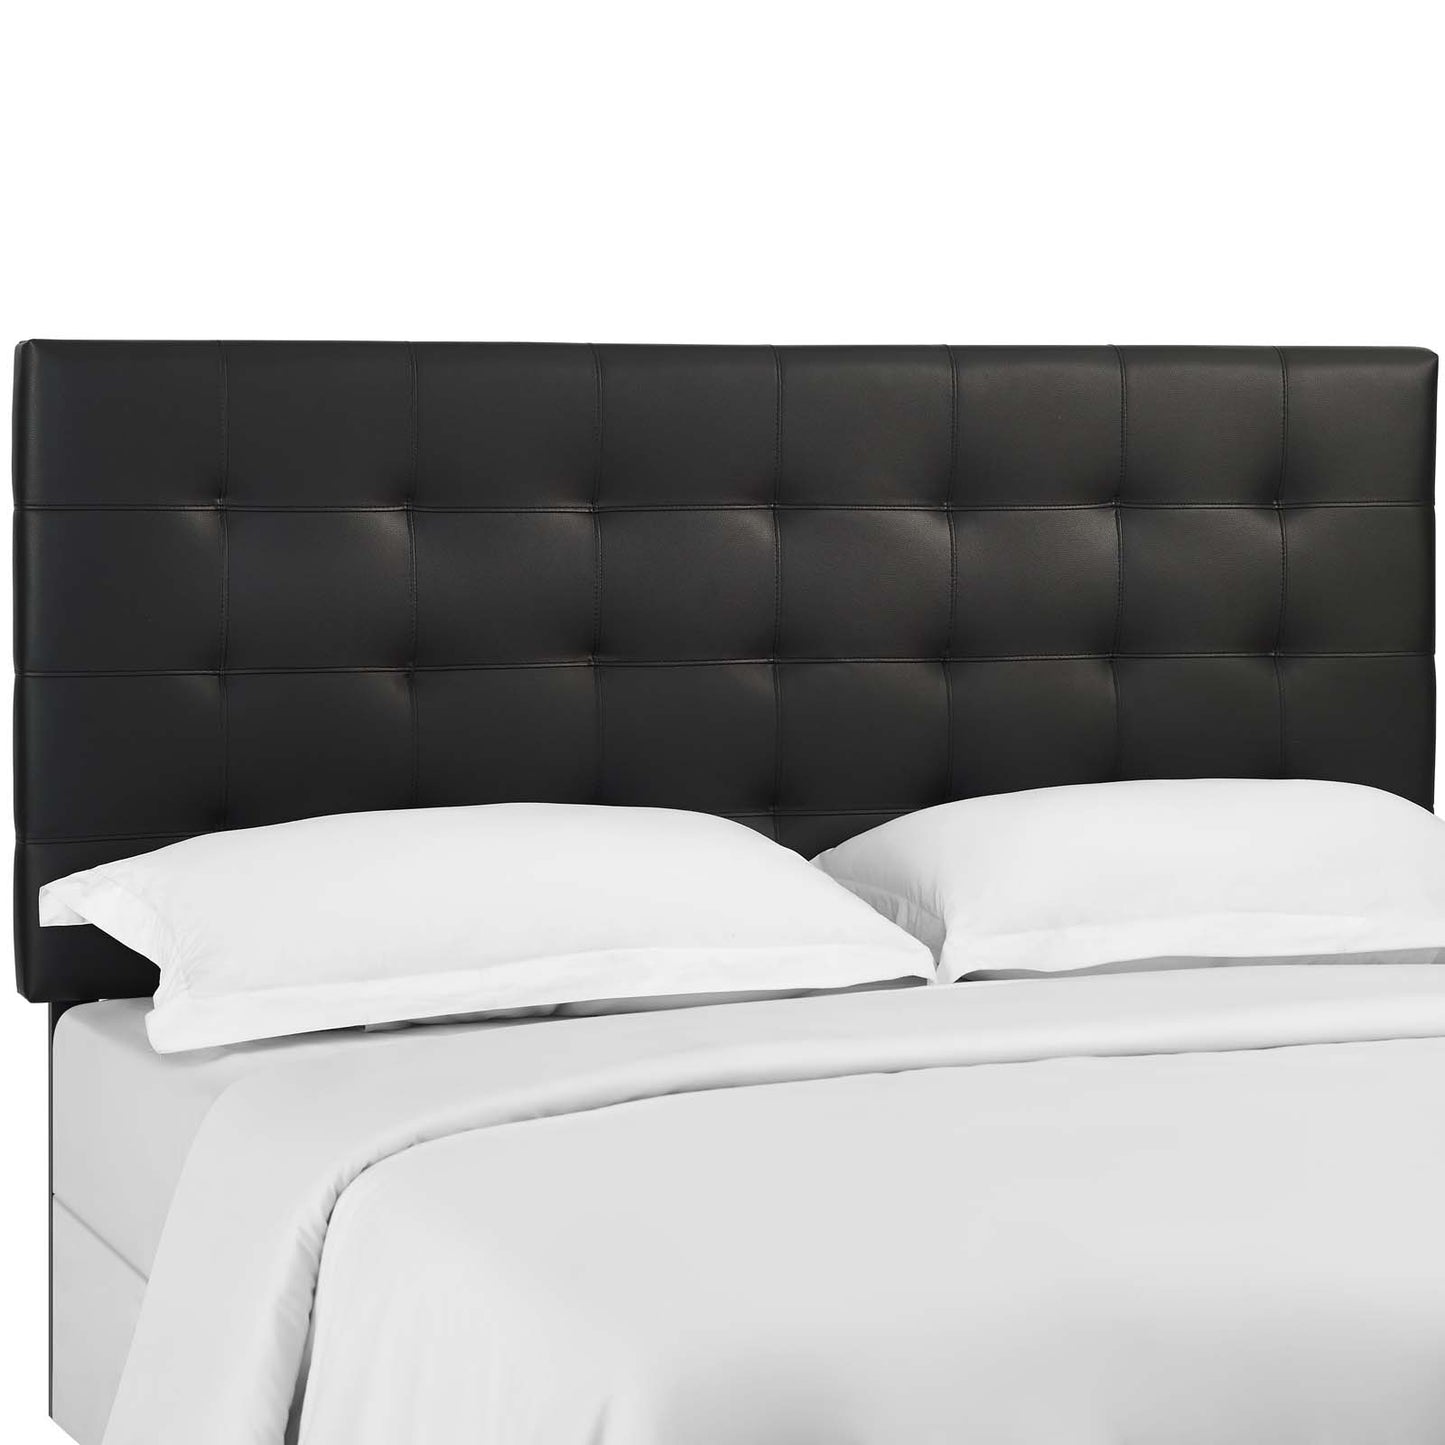 Paisley Tufted Full / Queen Upholstered Faux Leather Headboard Black MOD-5854-BLK